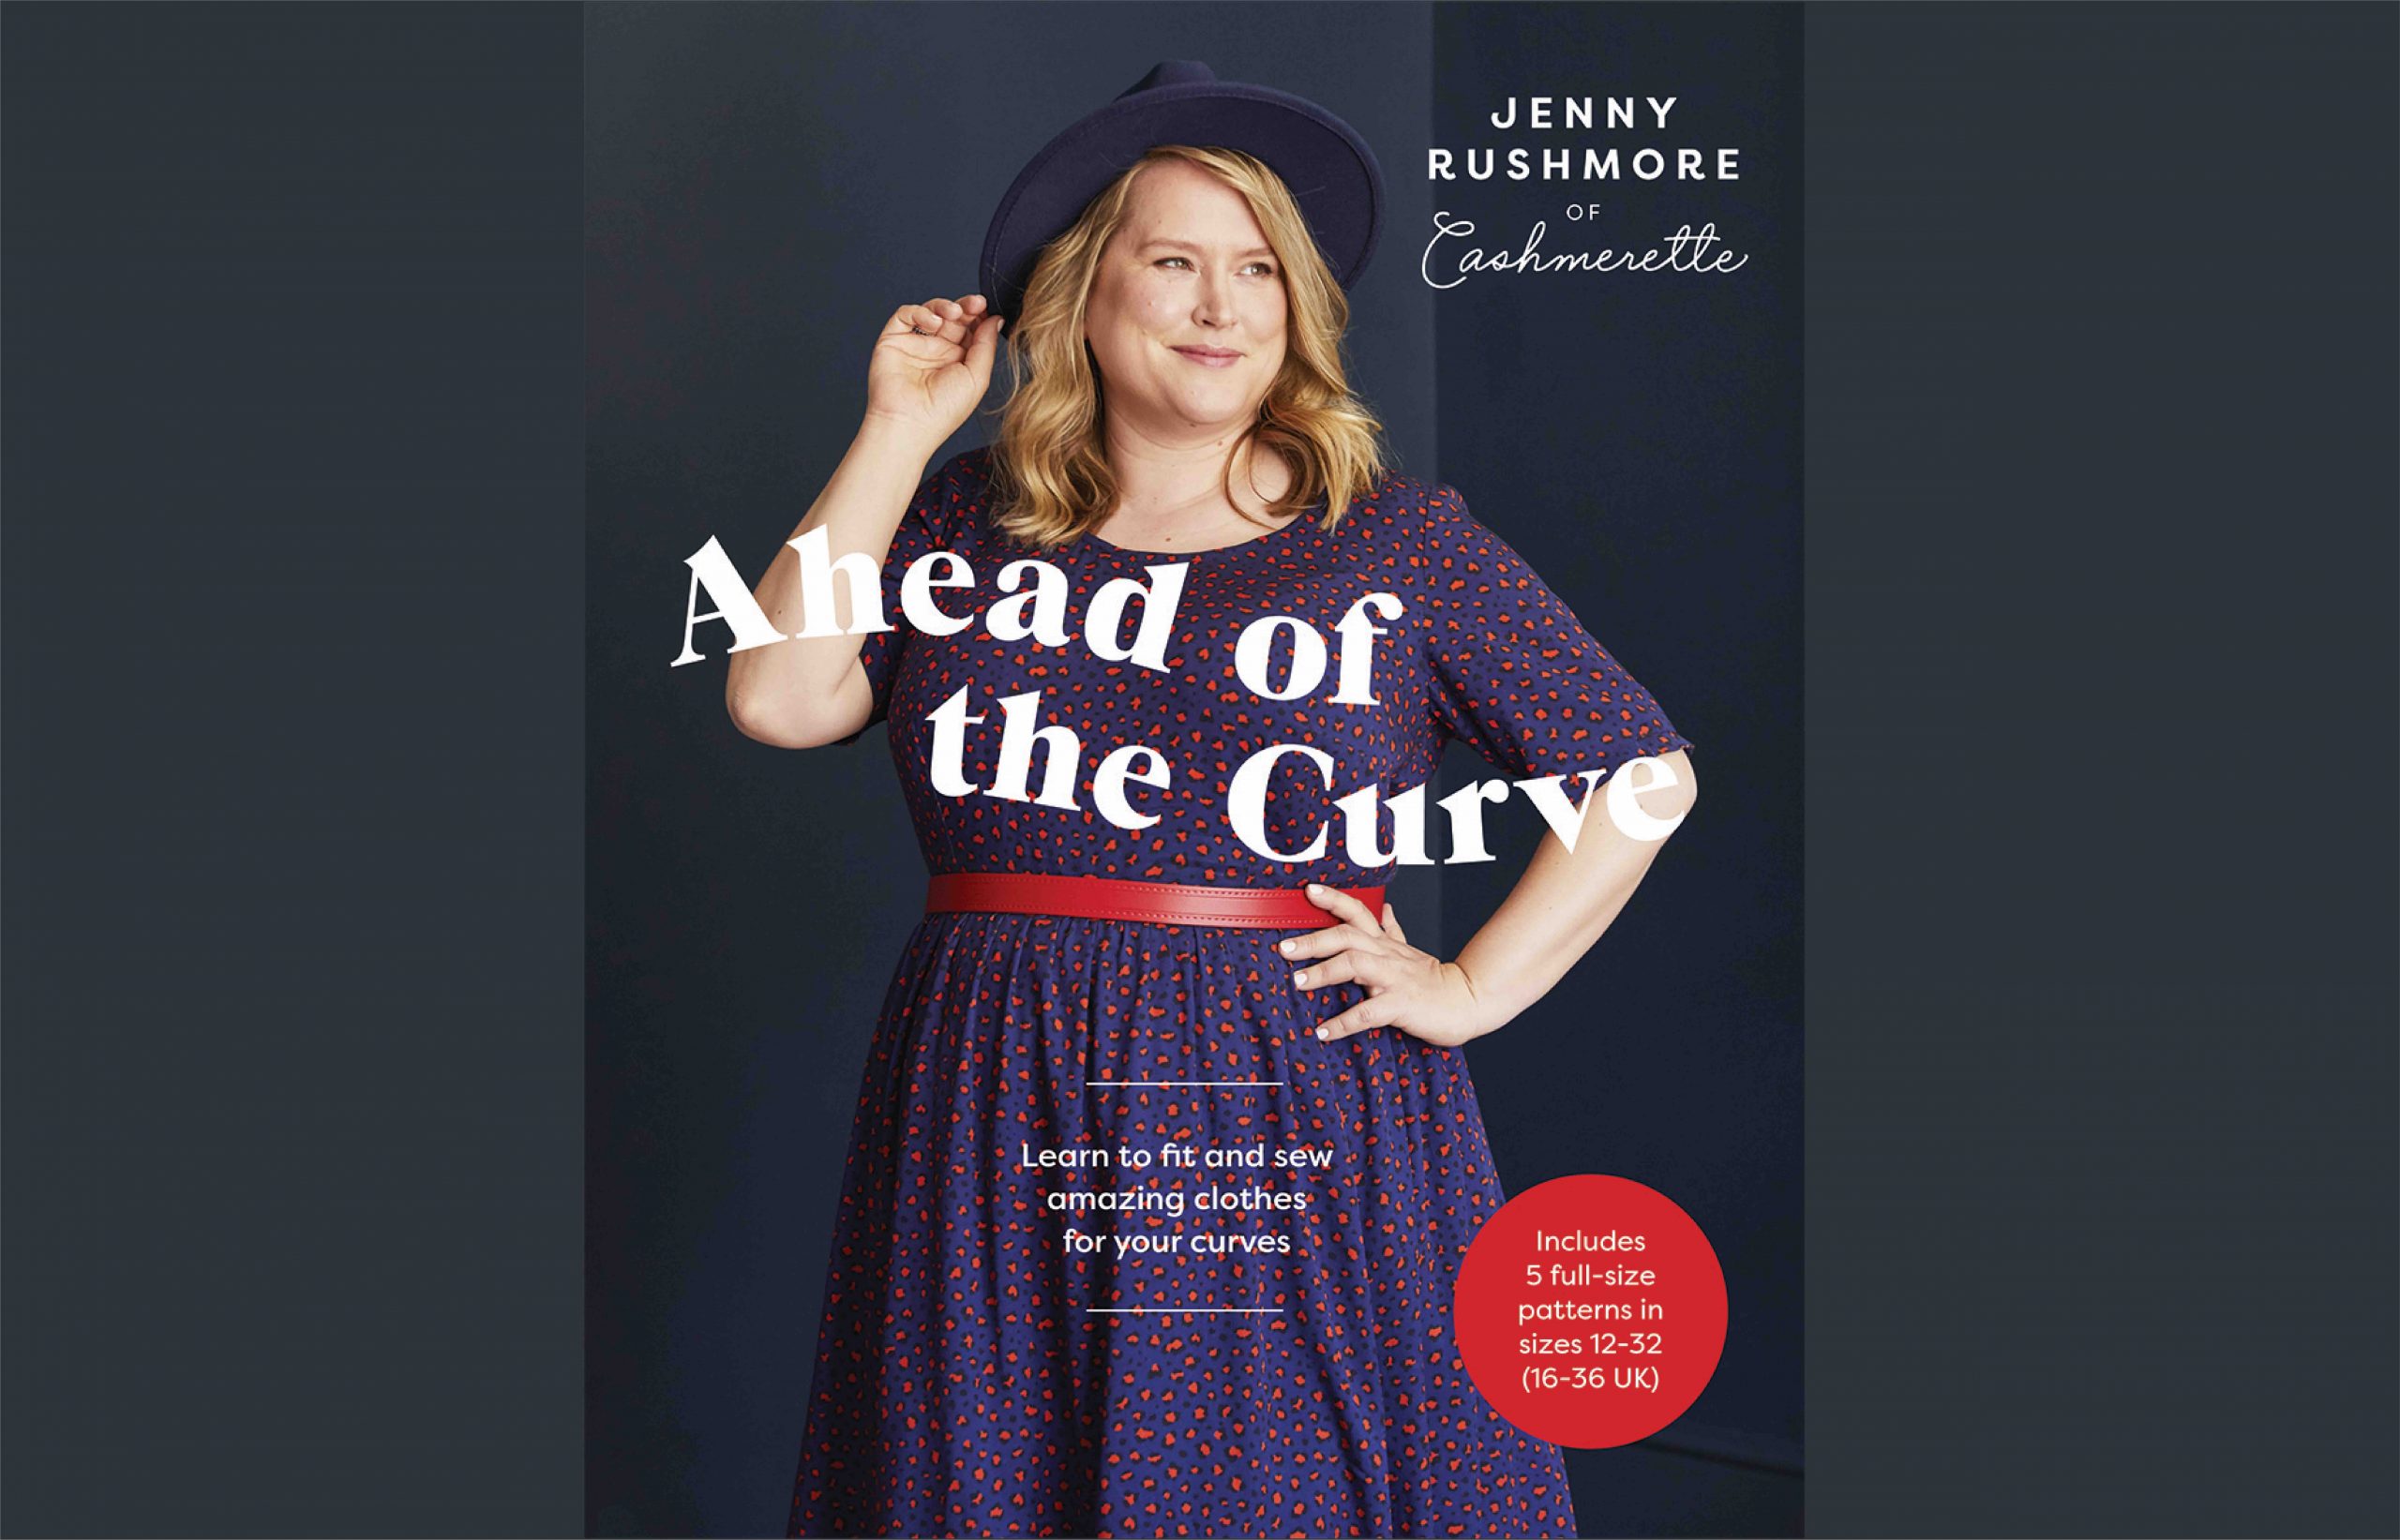 Book review: Ahead of the Curve by Jenny Rushmore of Cashmerette